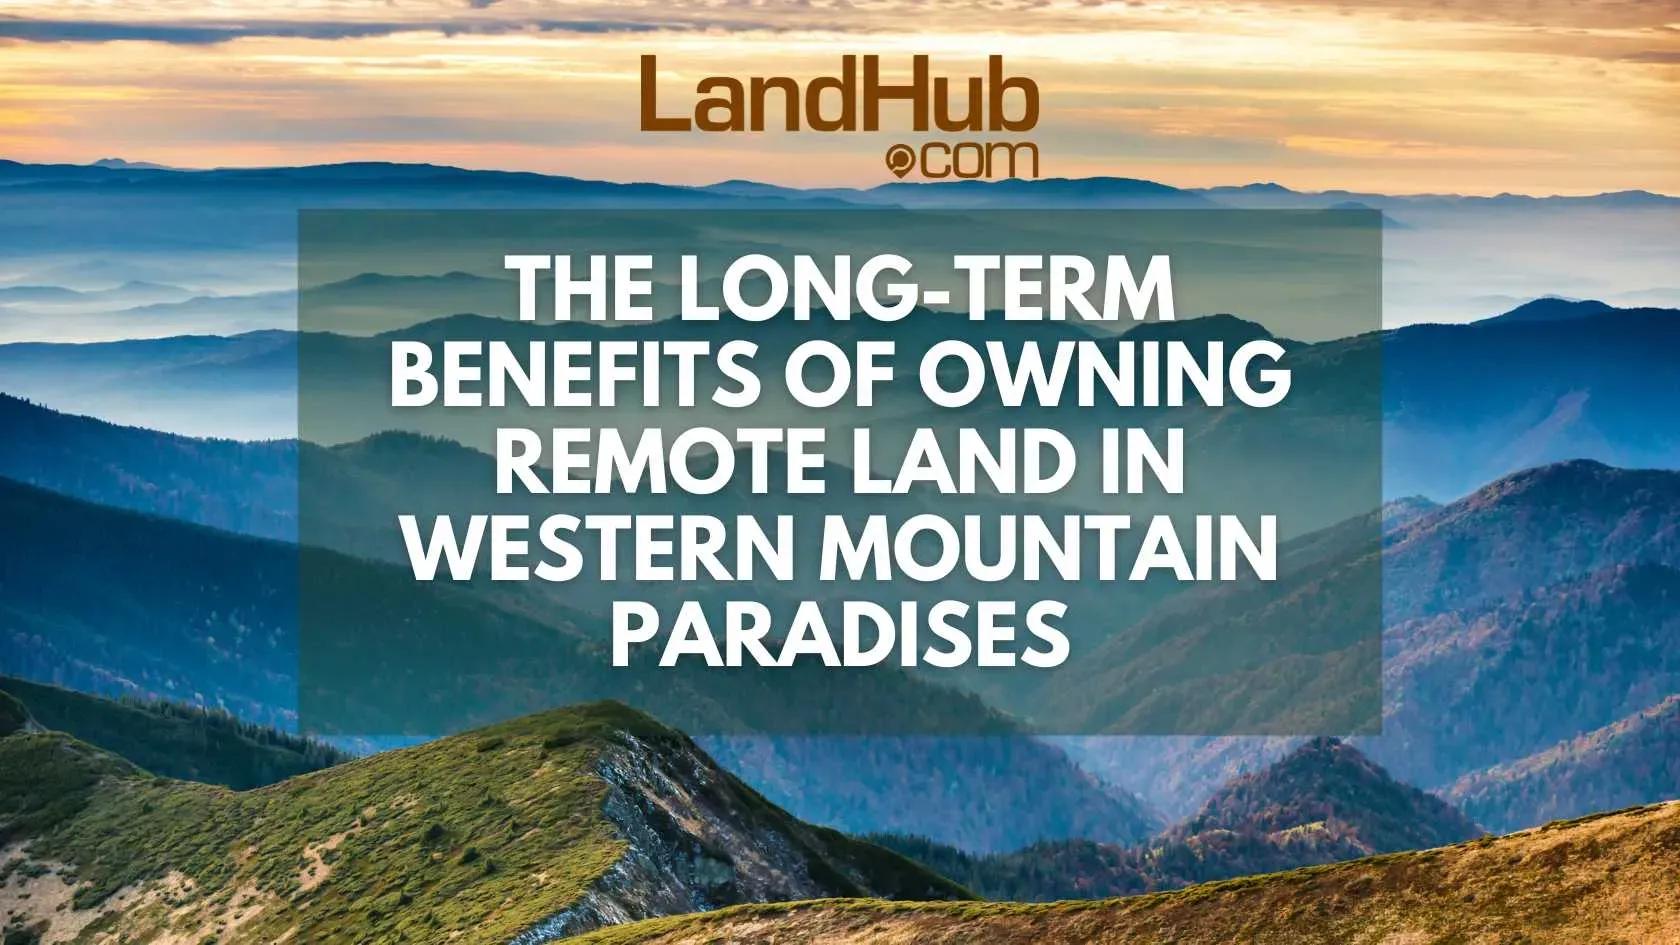 the long-term benefits of owning remote land in western mountain paradises